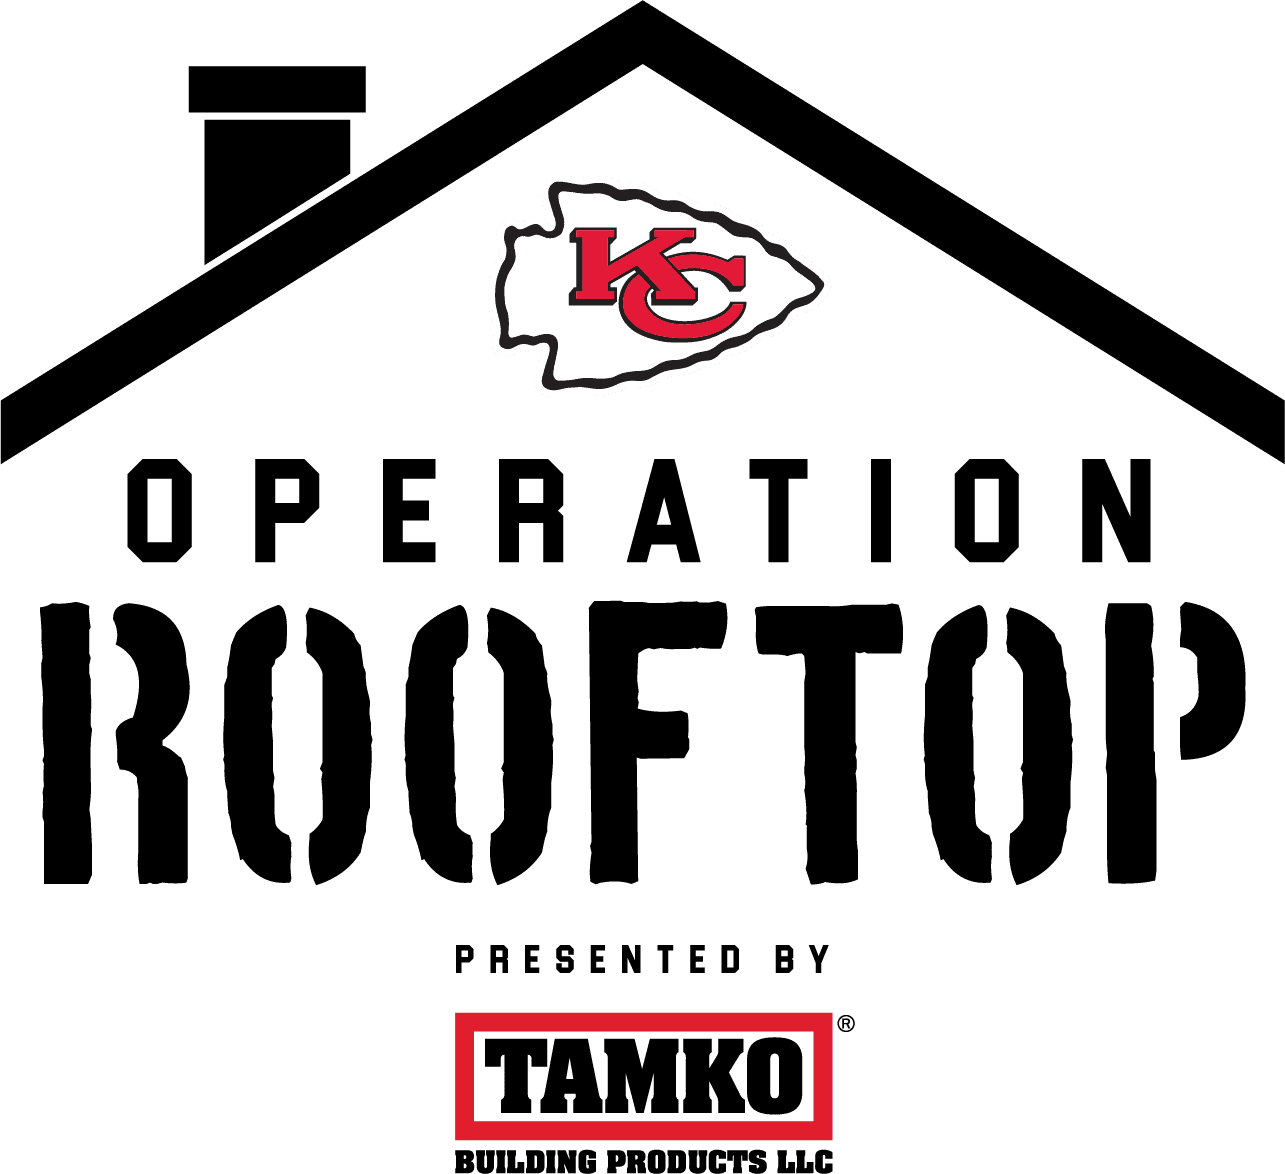 Operation Rooftop presented by TAMKO